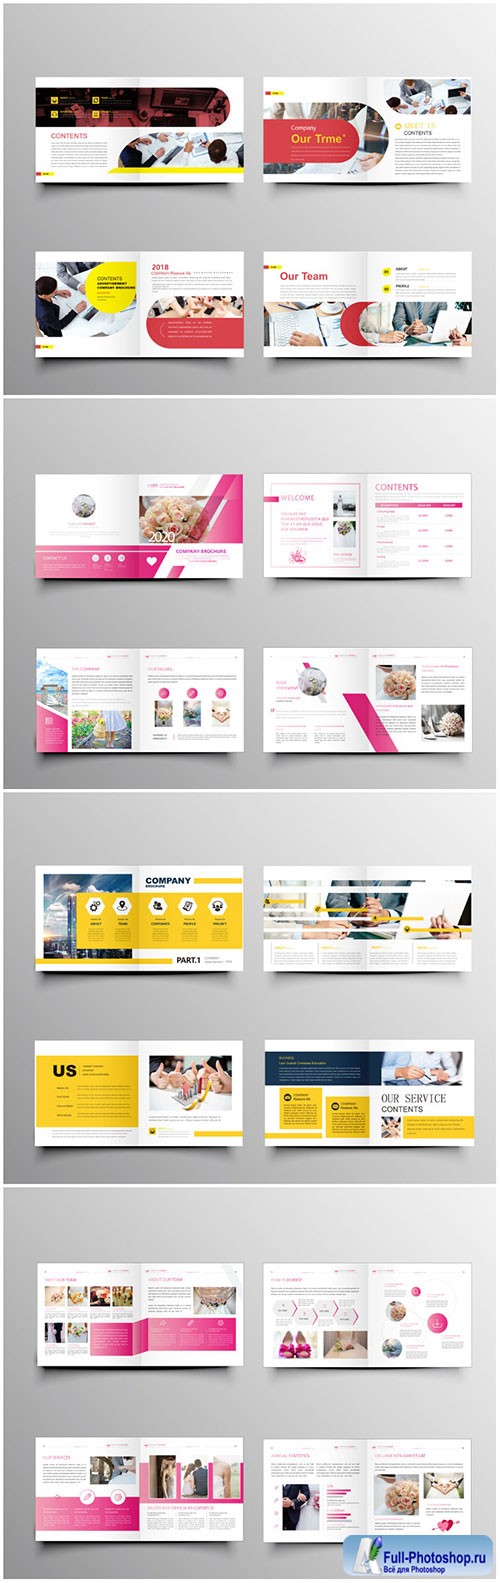 Brochure template vector layout design, corporate business annual report, magazine, flyer mockup # 227